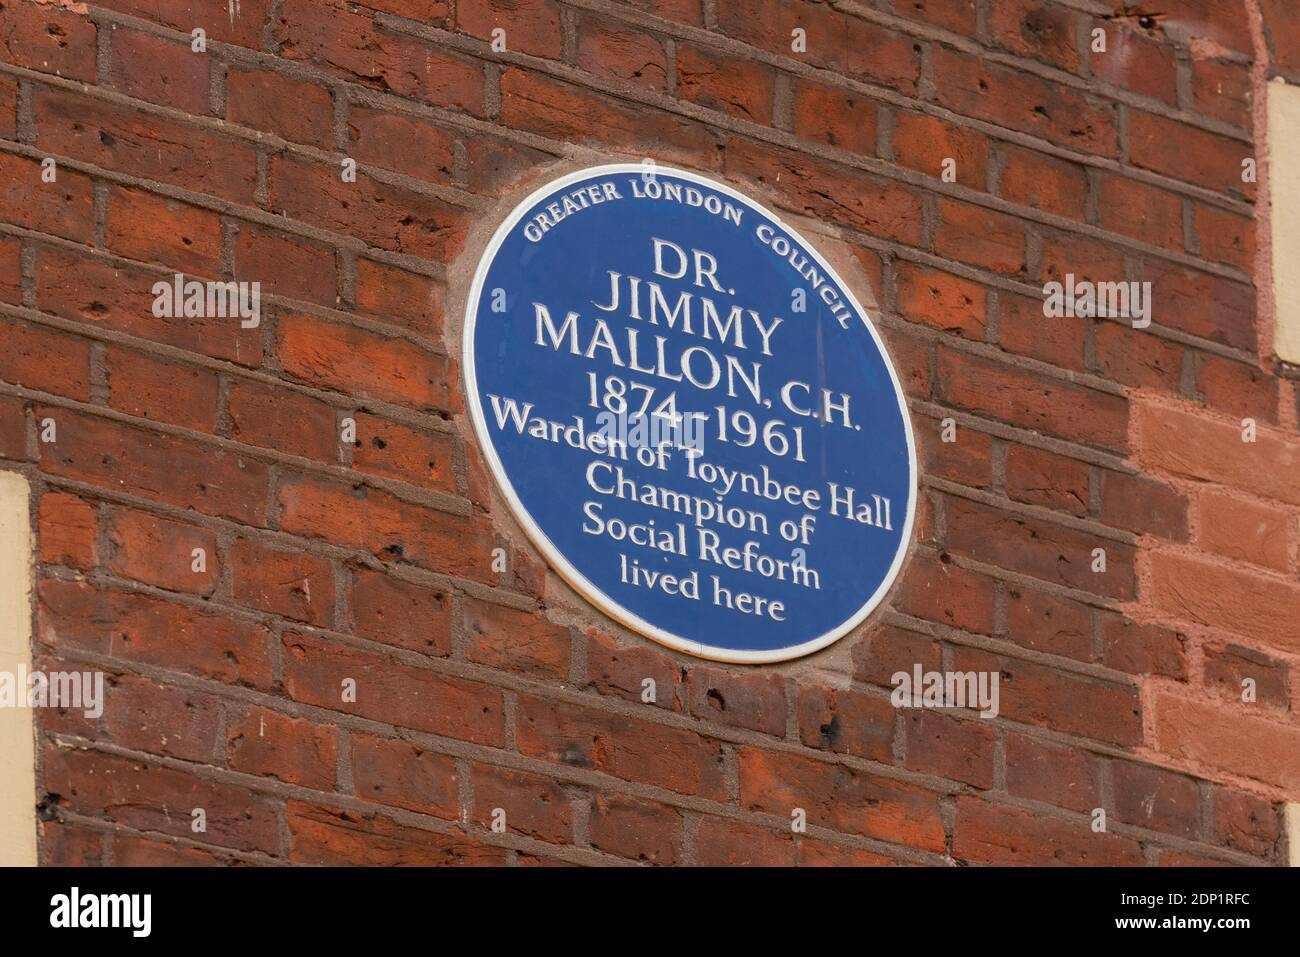 MALLON, DR JIMMY, C.H. (1874-1961) Blue Plaque erected in 1984 by Greater London Council at Toynbee Hall, Commercial Street, Whitechapel, London Stock Photo